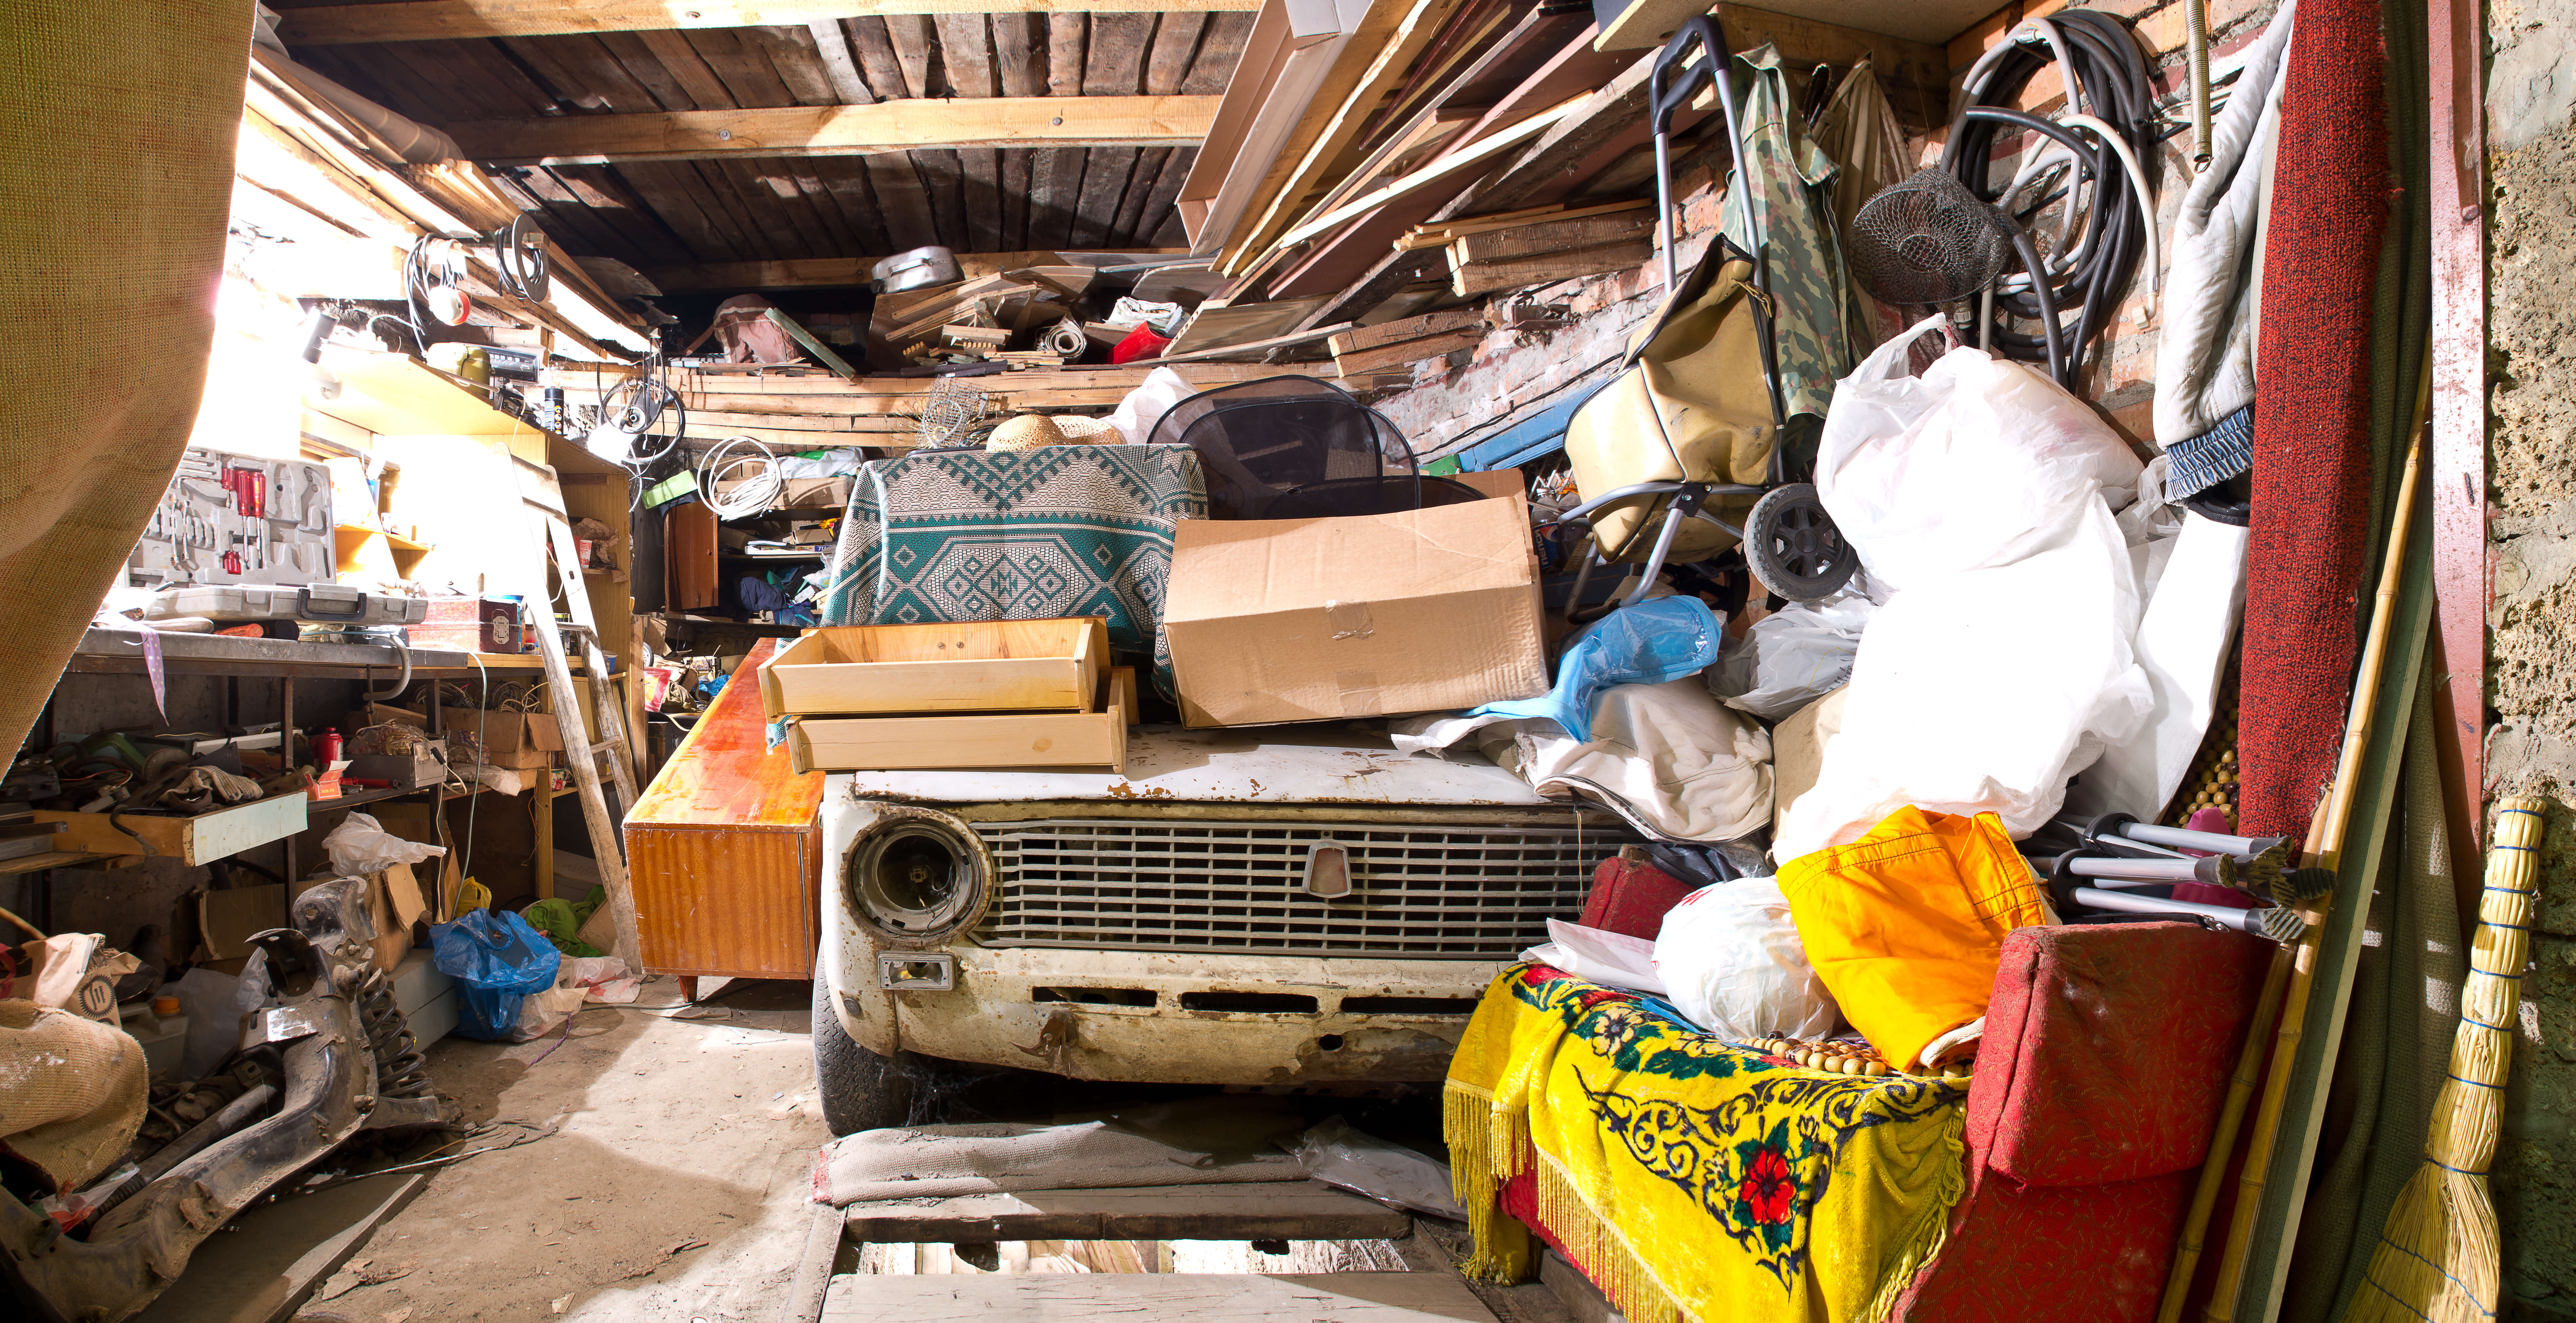 Photo of clutter in a garage